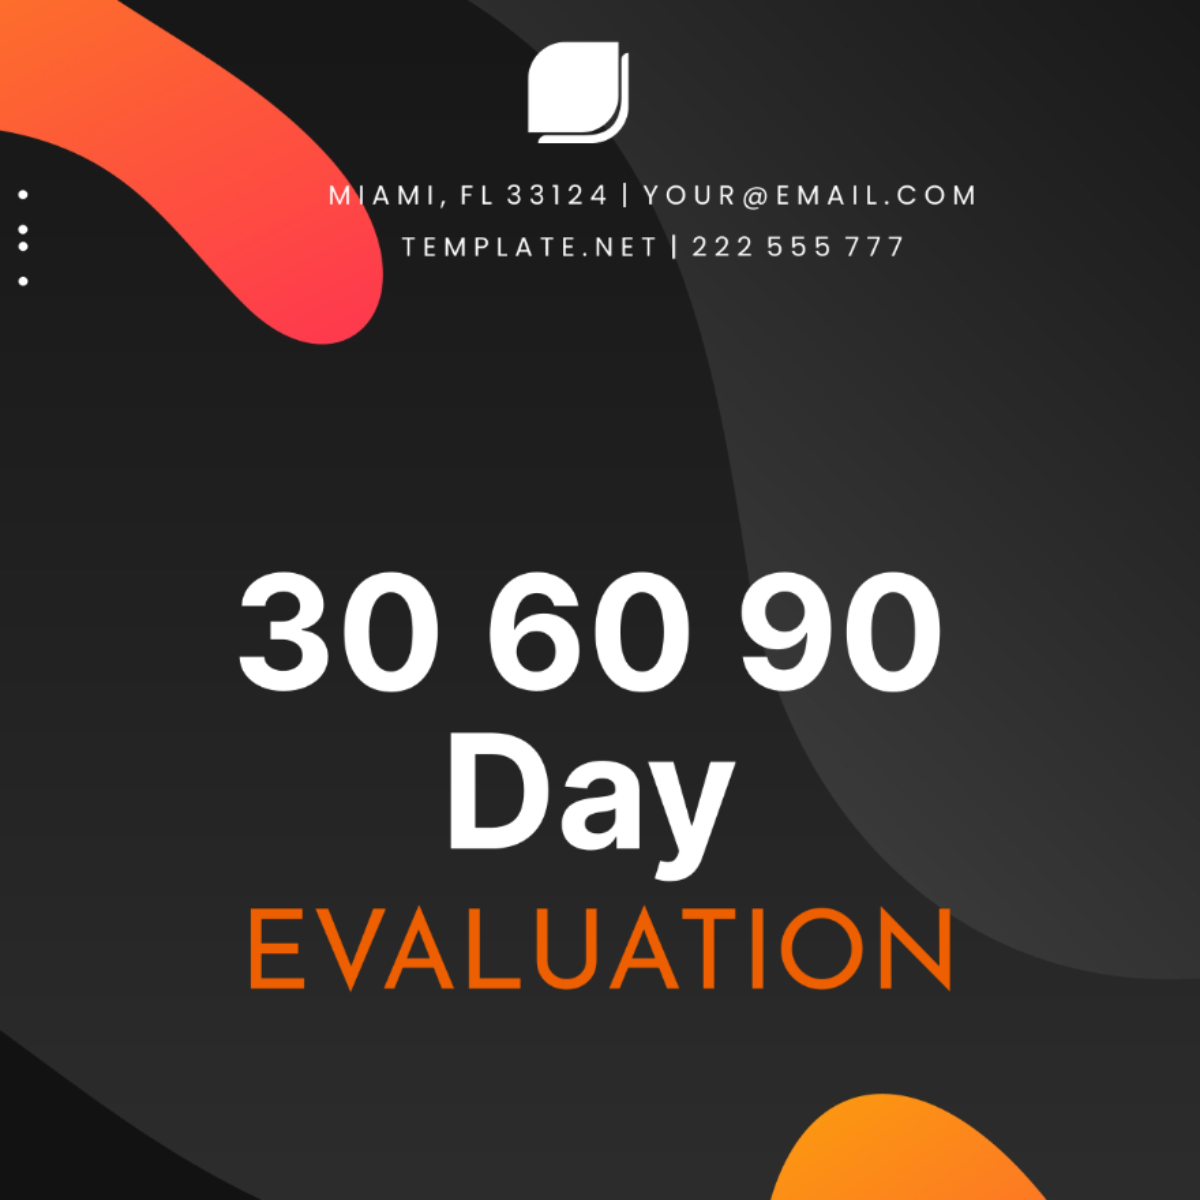 30 60 90 Day Evaluation Template